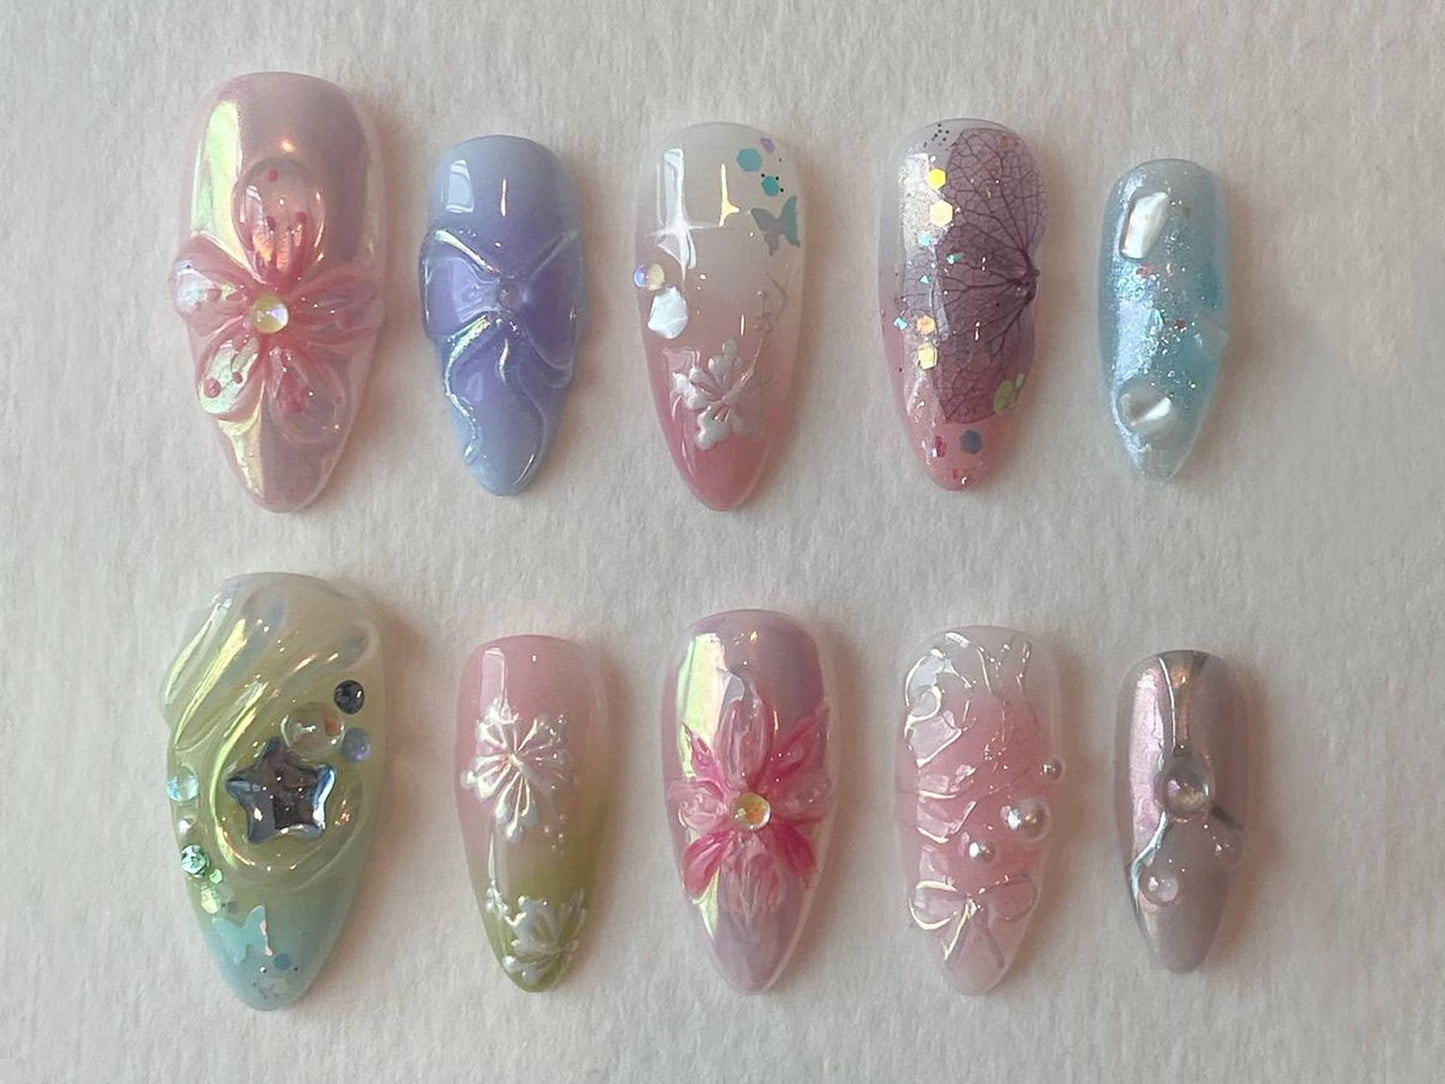 Y2K-Inspired Nails : Style Light Pink Nail Set with 3D Flower Patterns and Cute Bows | 3D Flower Gel Art | Press On Nails | JT252